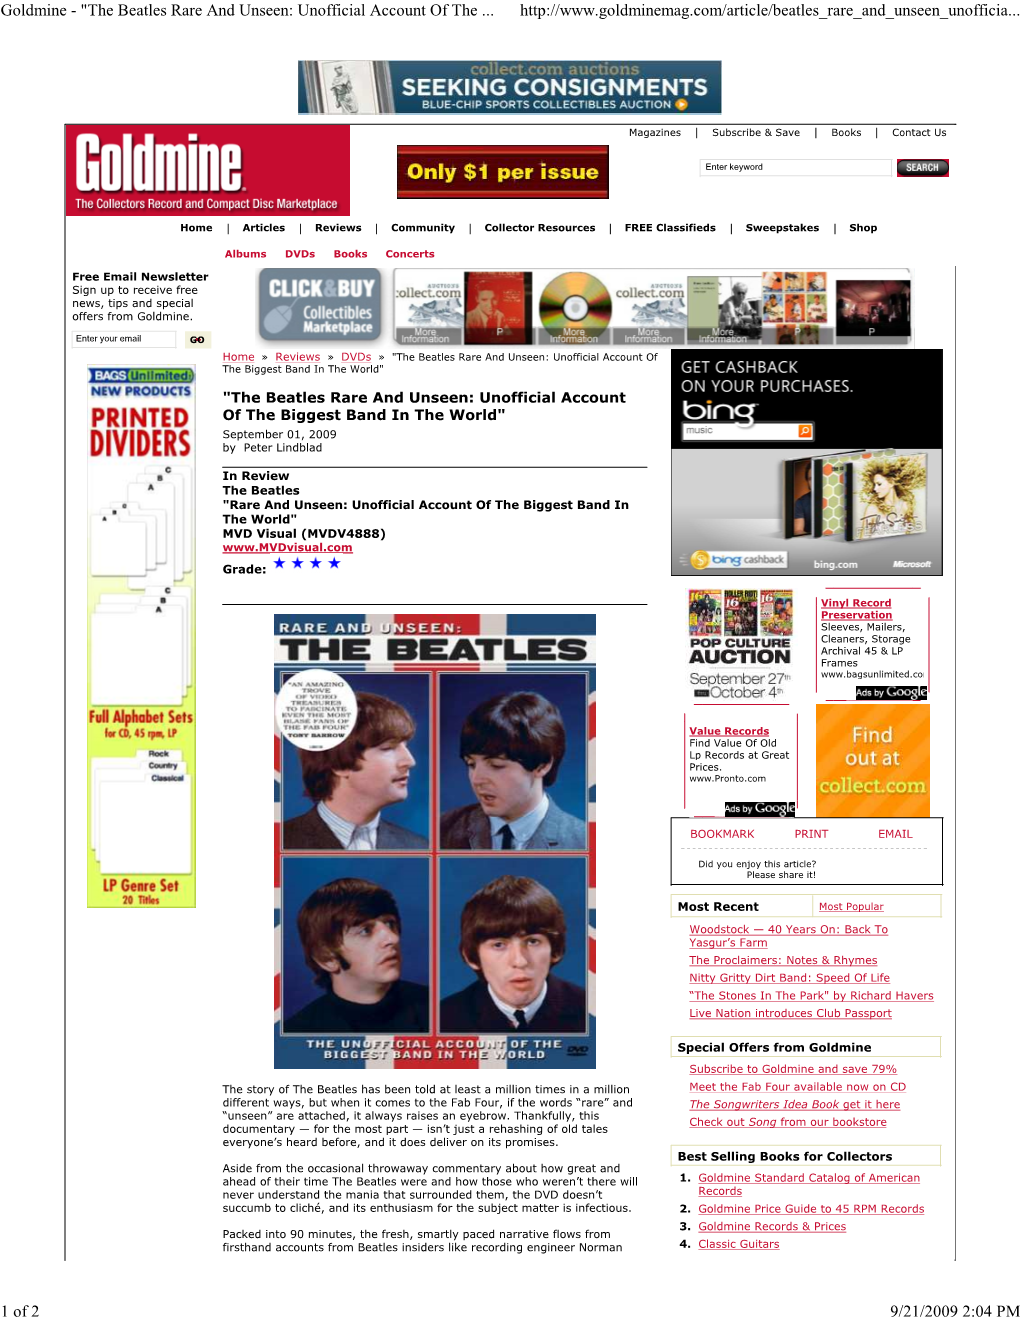 Goldmine - "The Beatles Rare and Unseen: Unofficial Account of the